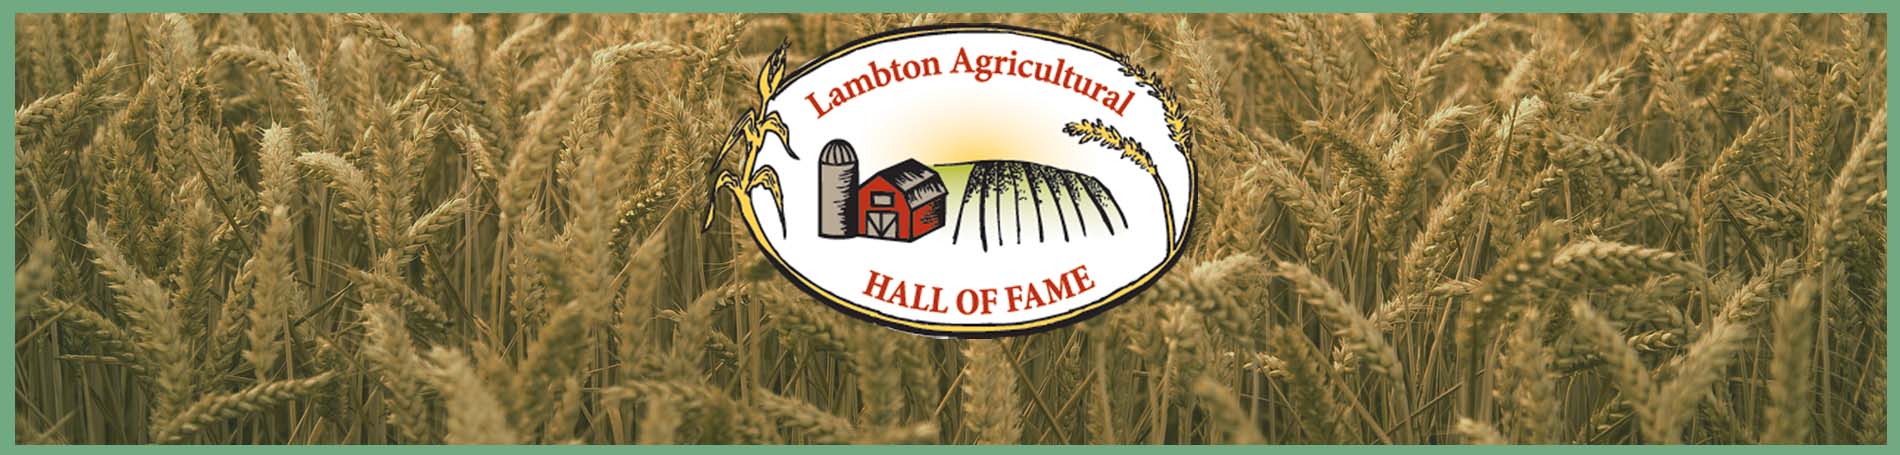 Lambton Agricultural Hall of Fame